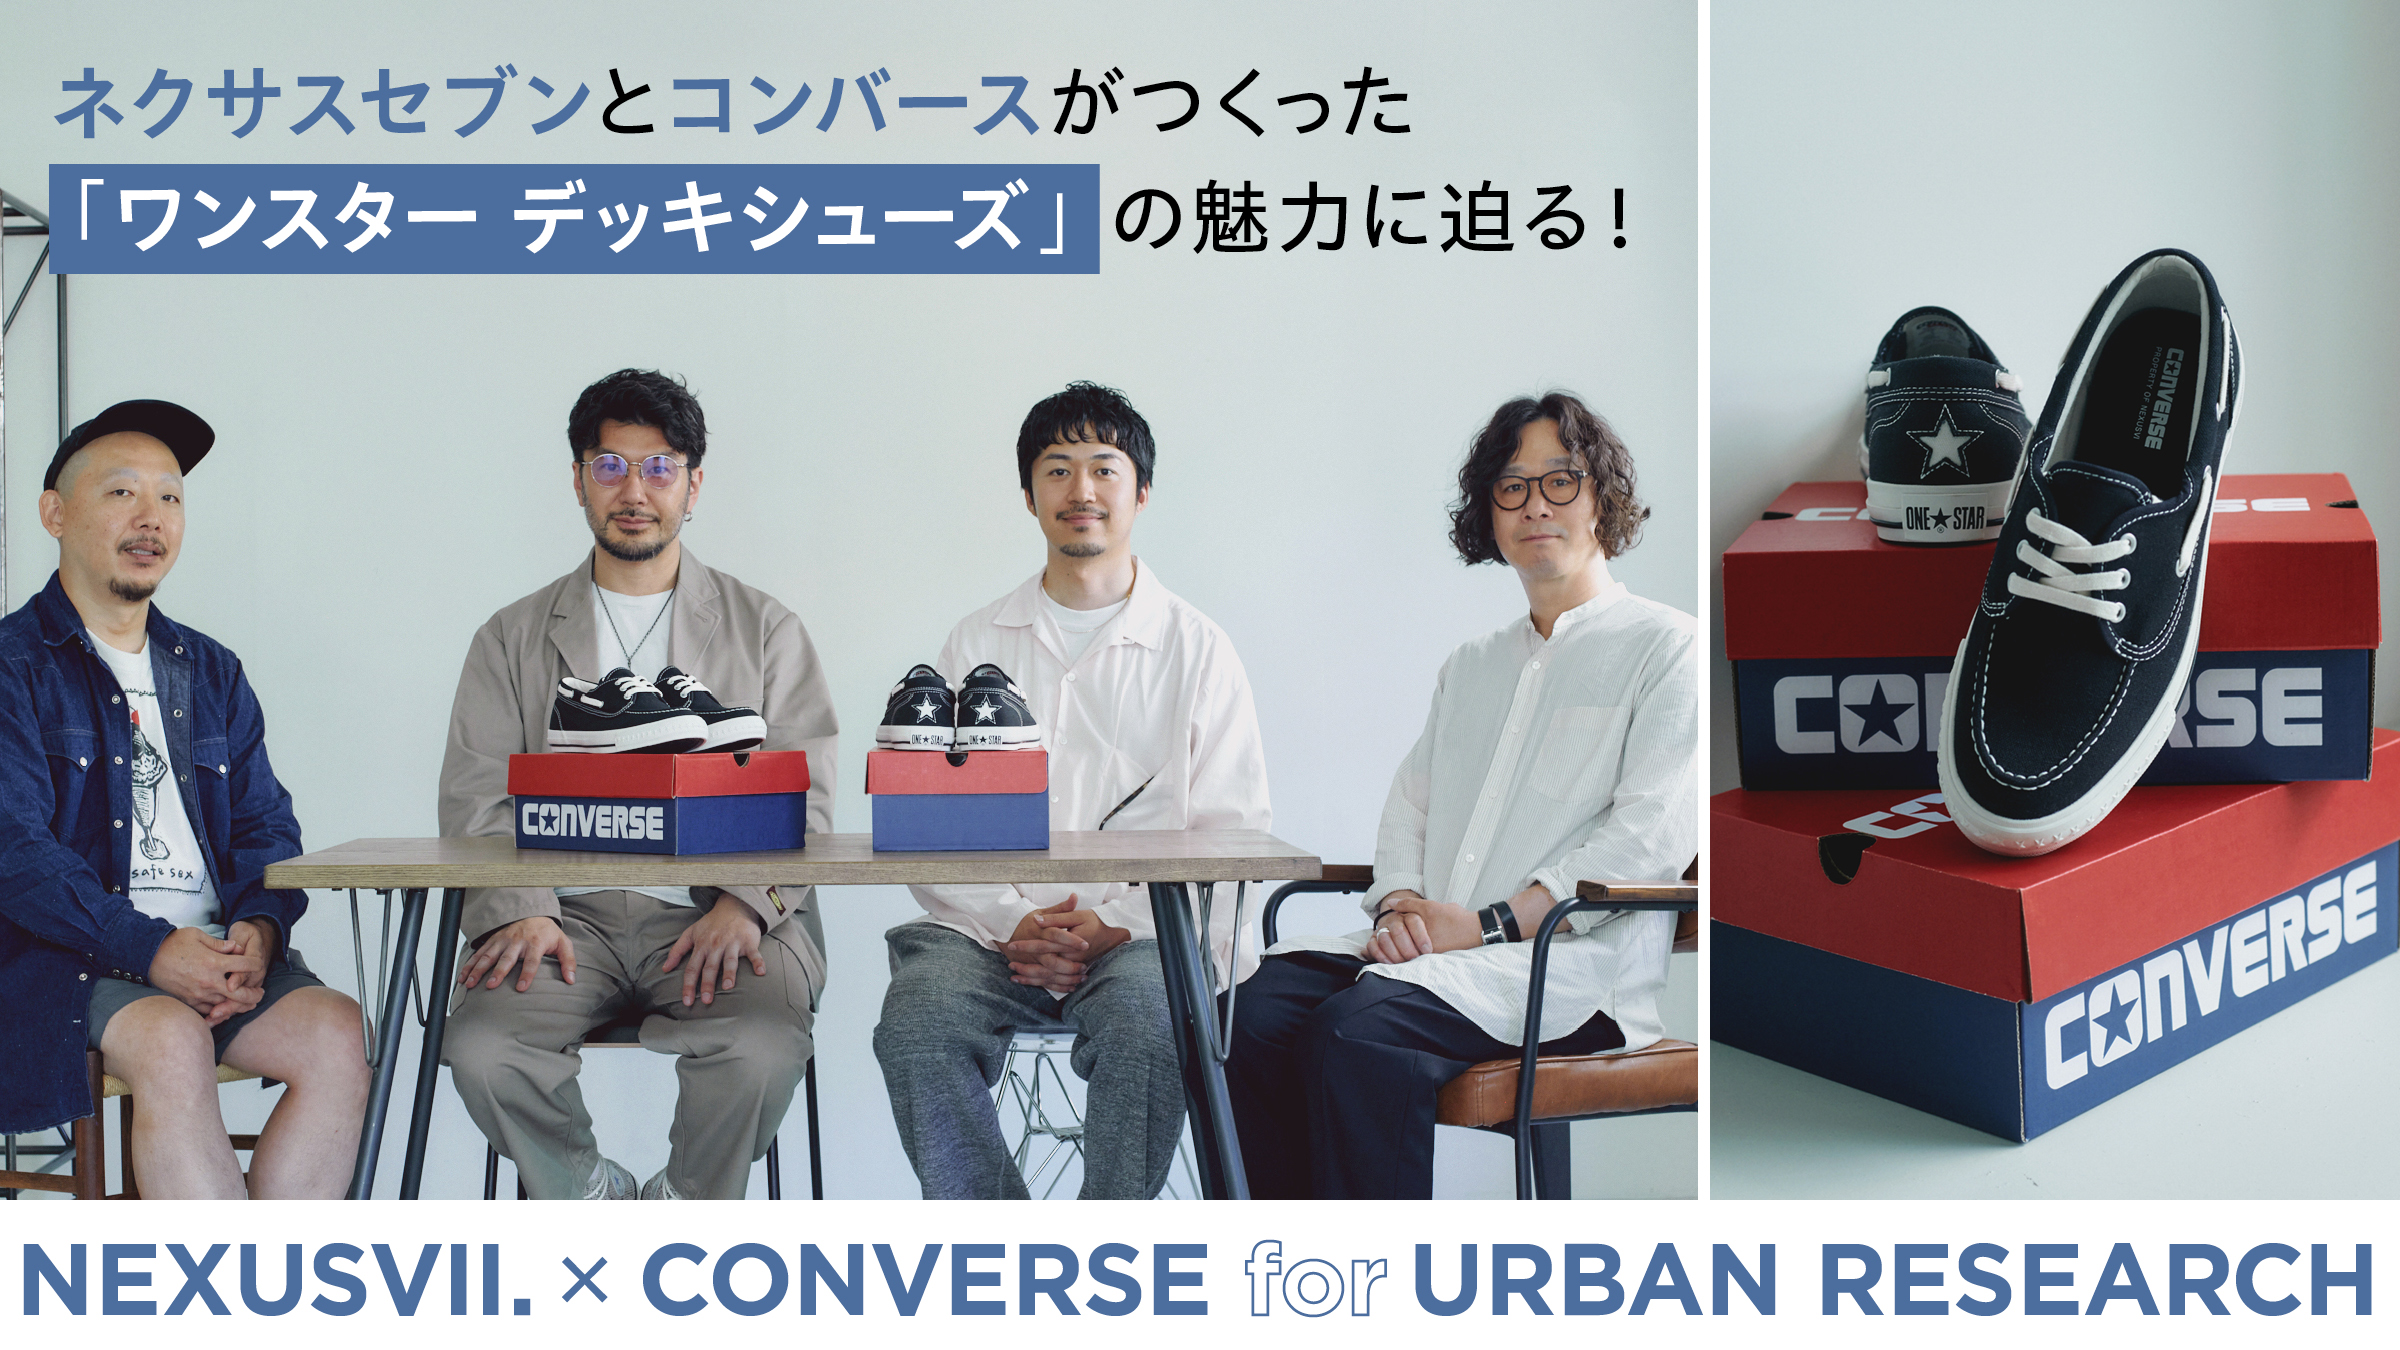 A look at the appeal of the "One Star Deck Shoes" created by NEXUSⅦ. and Converse!